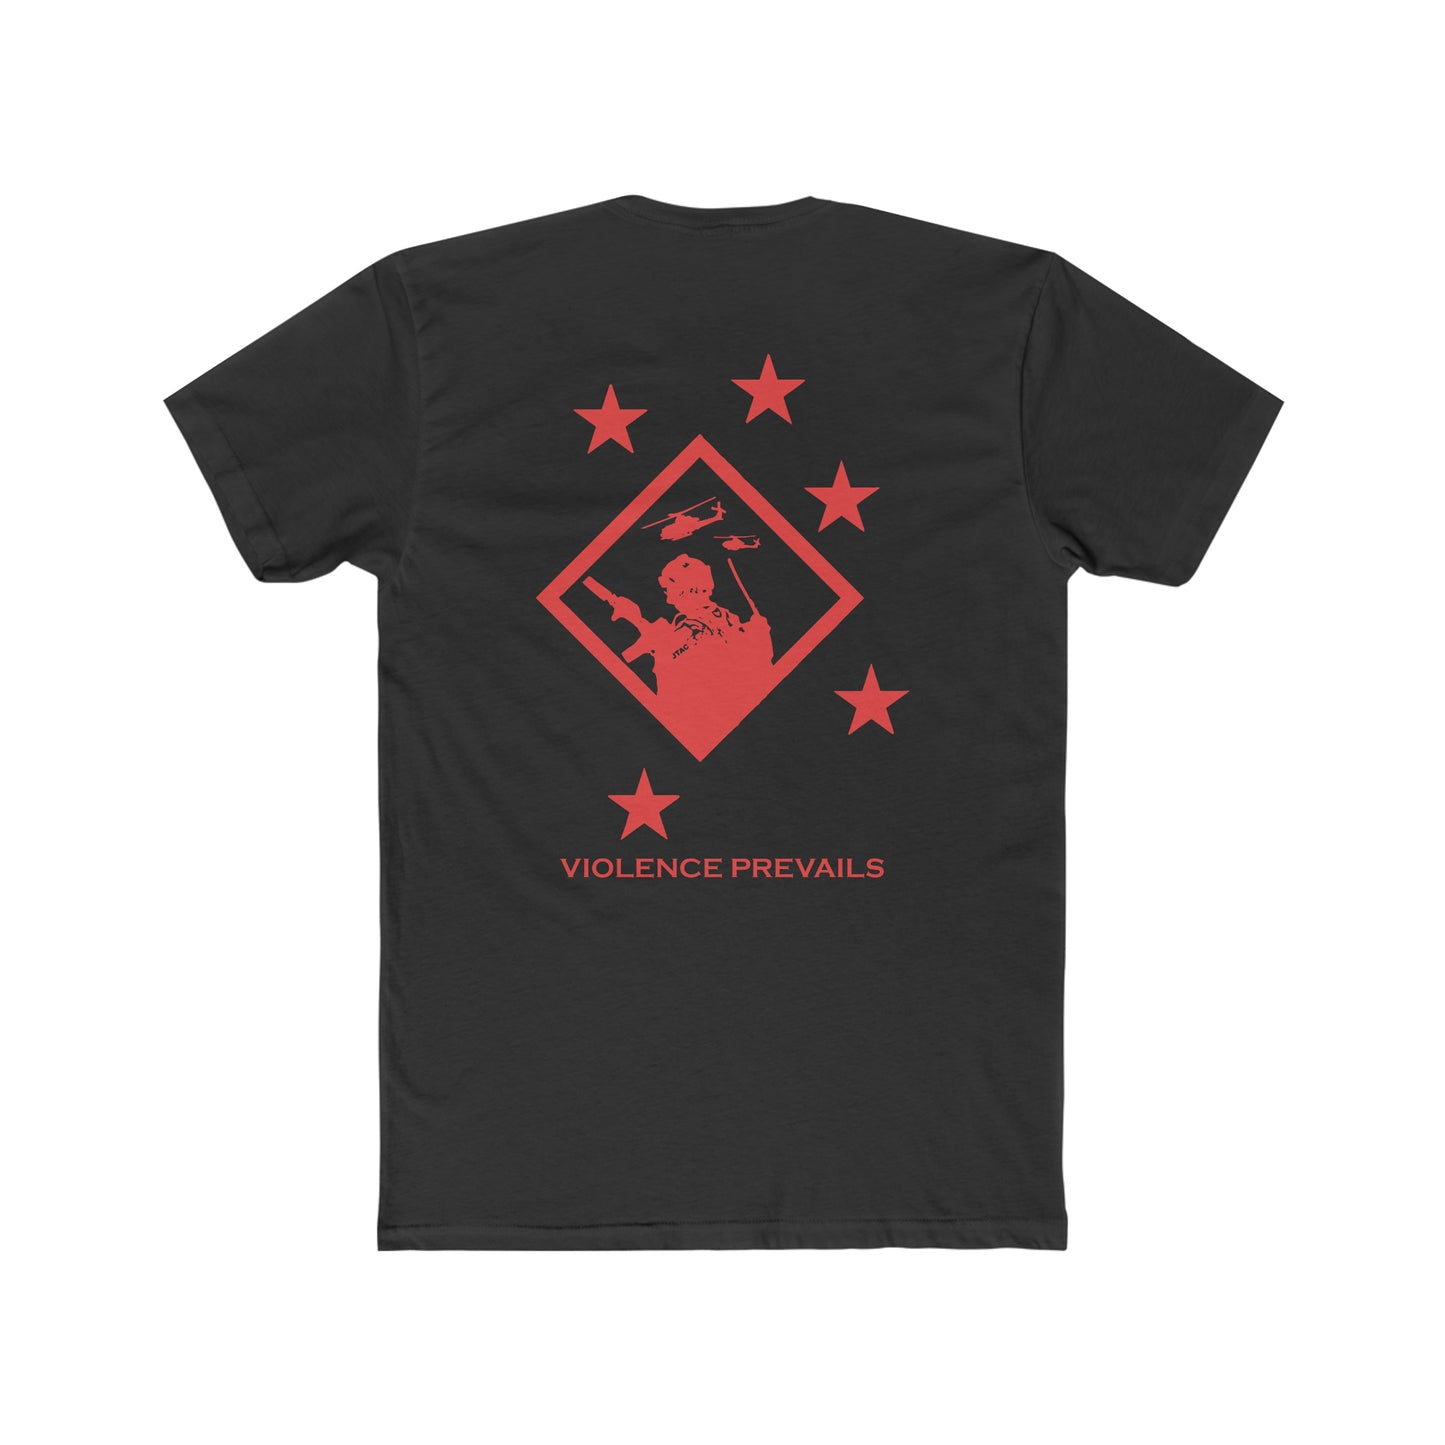 Violence Prevails Tee